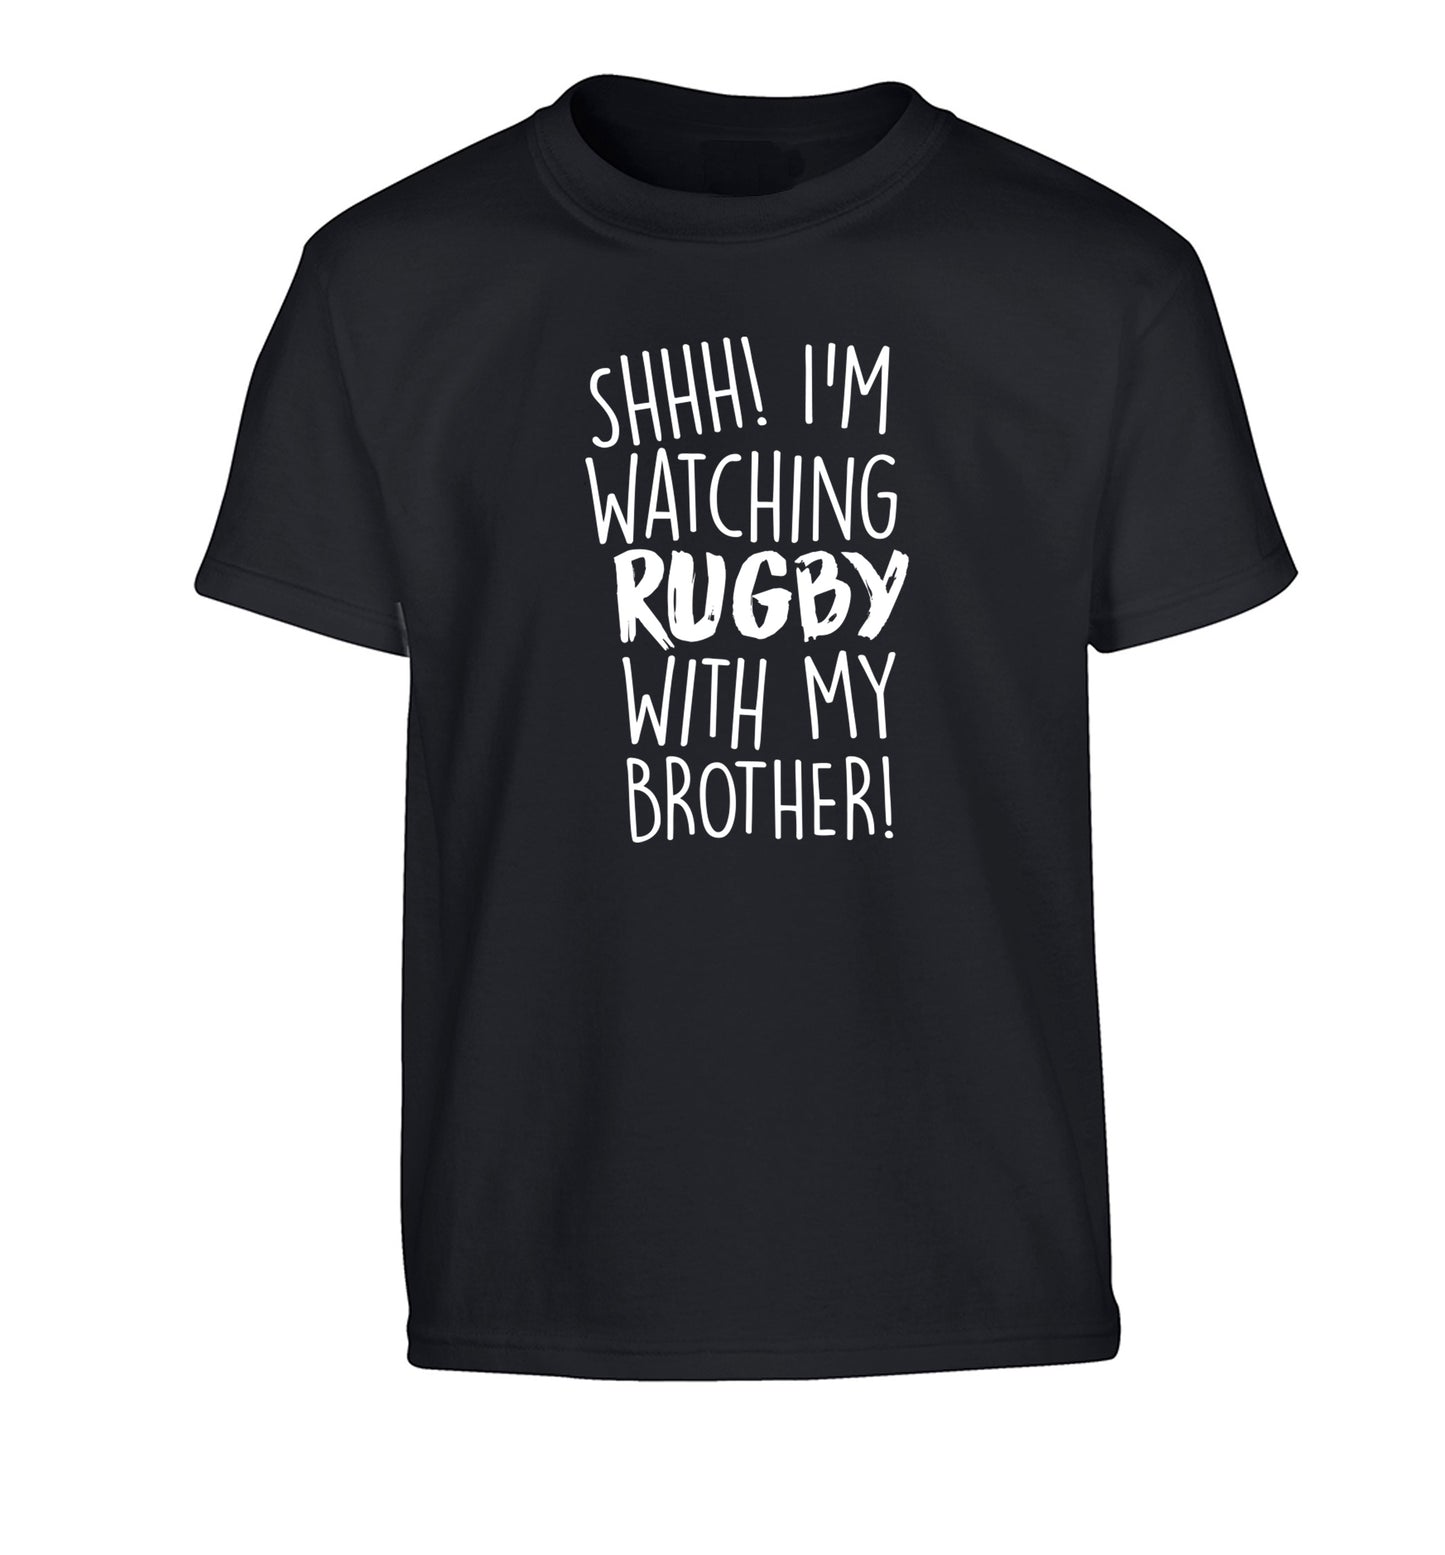 Shh... I'm watching rugby with my brother Children's black Tshirt 12-13 Years